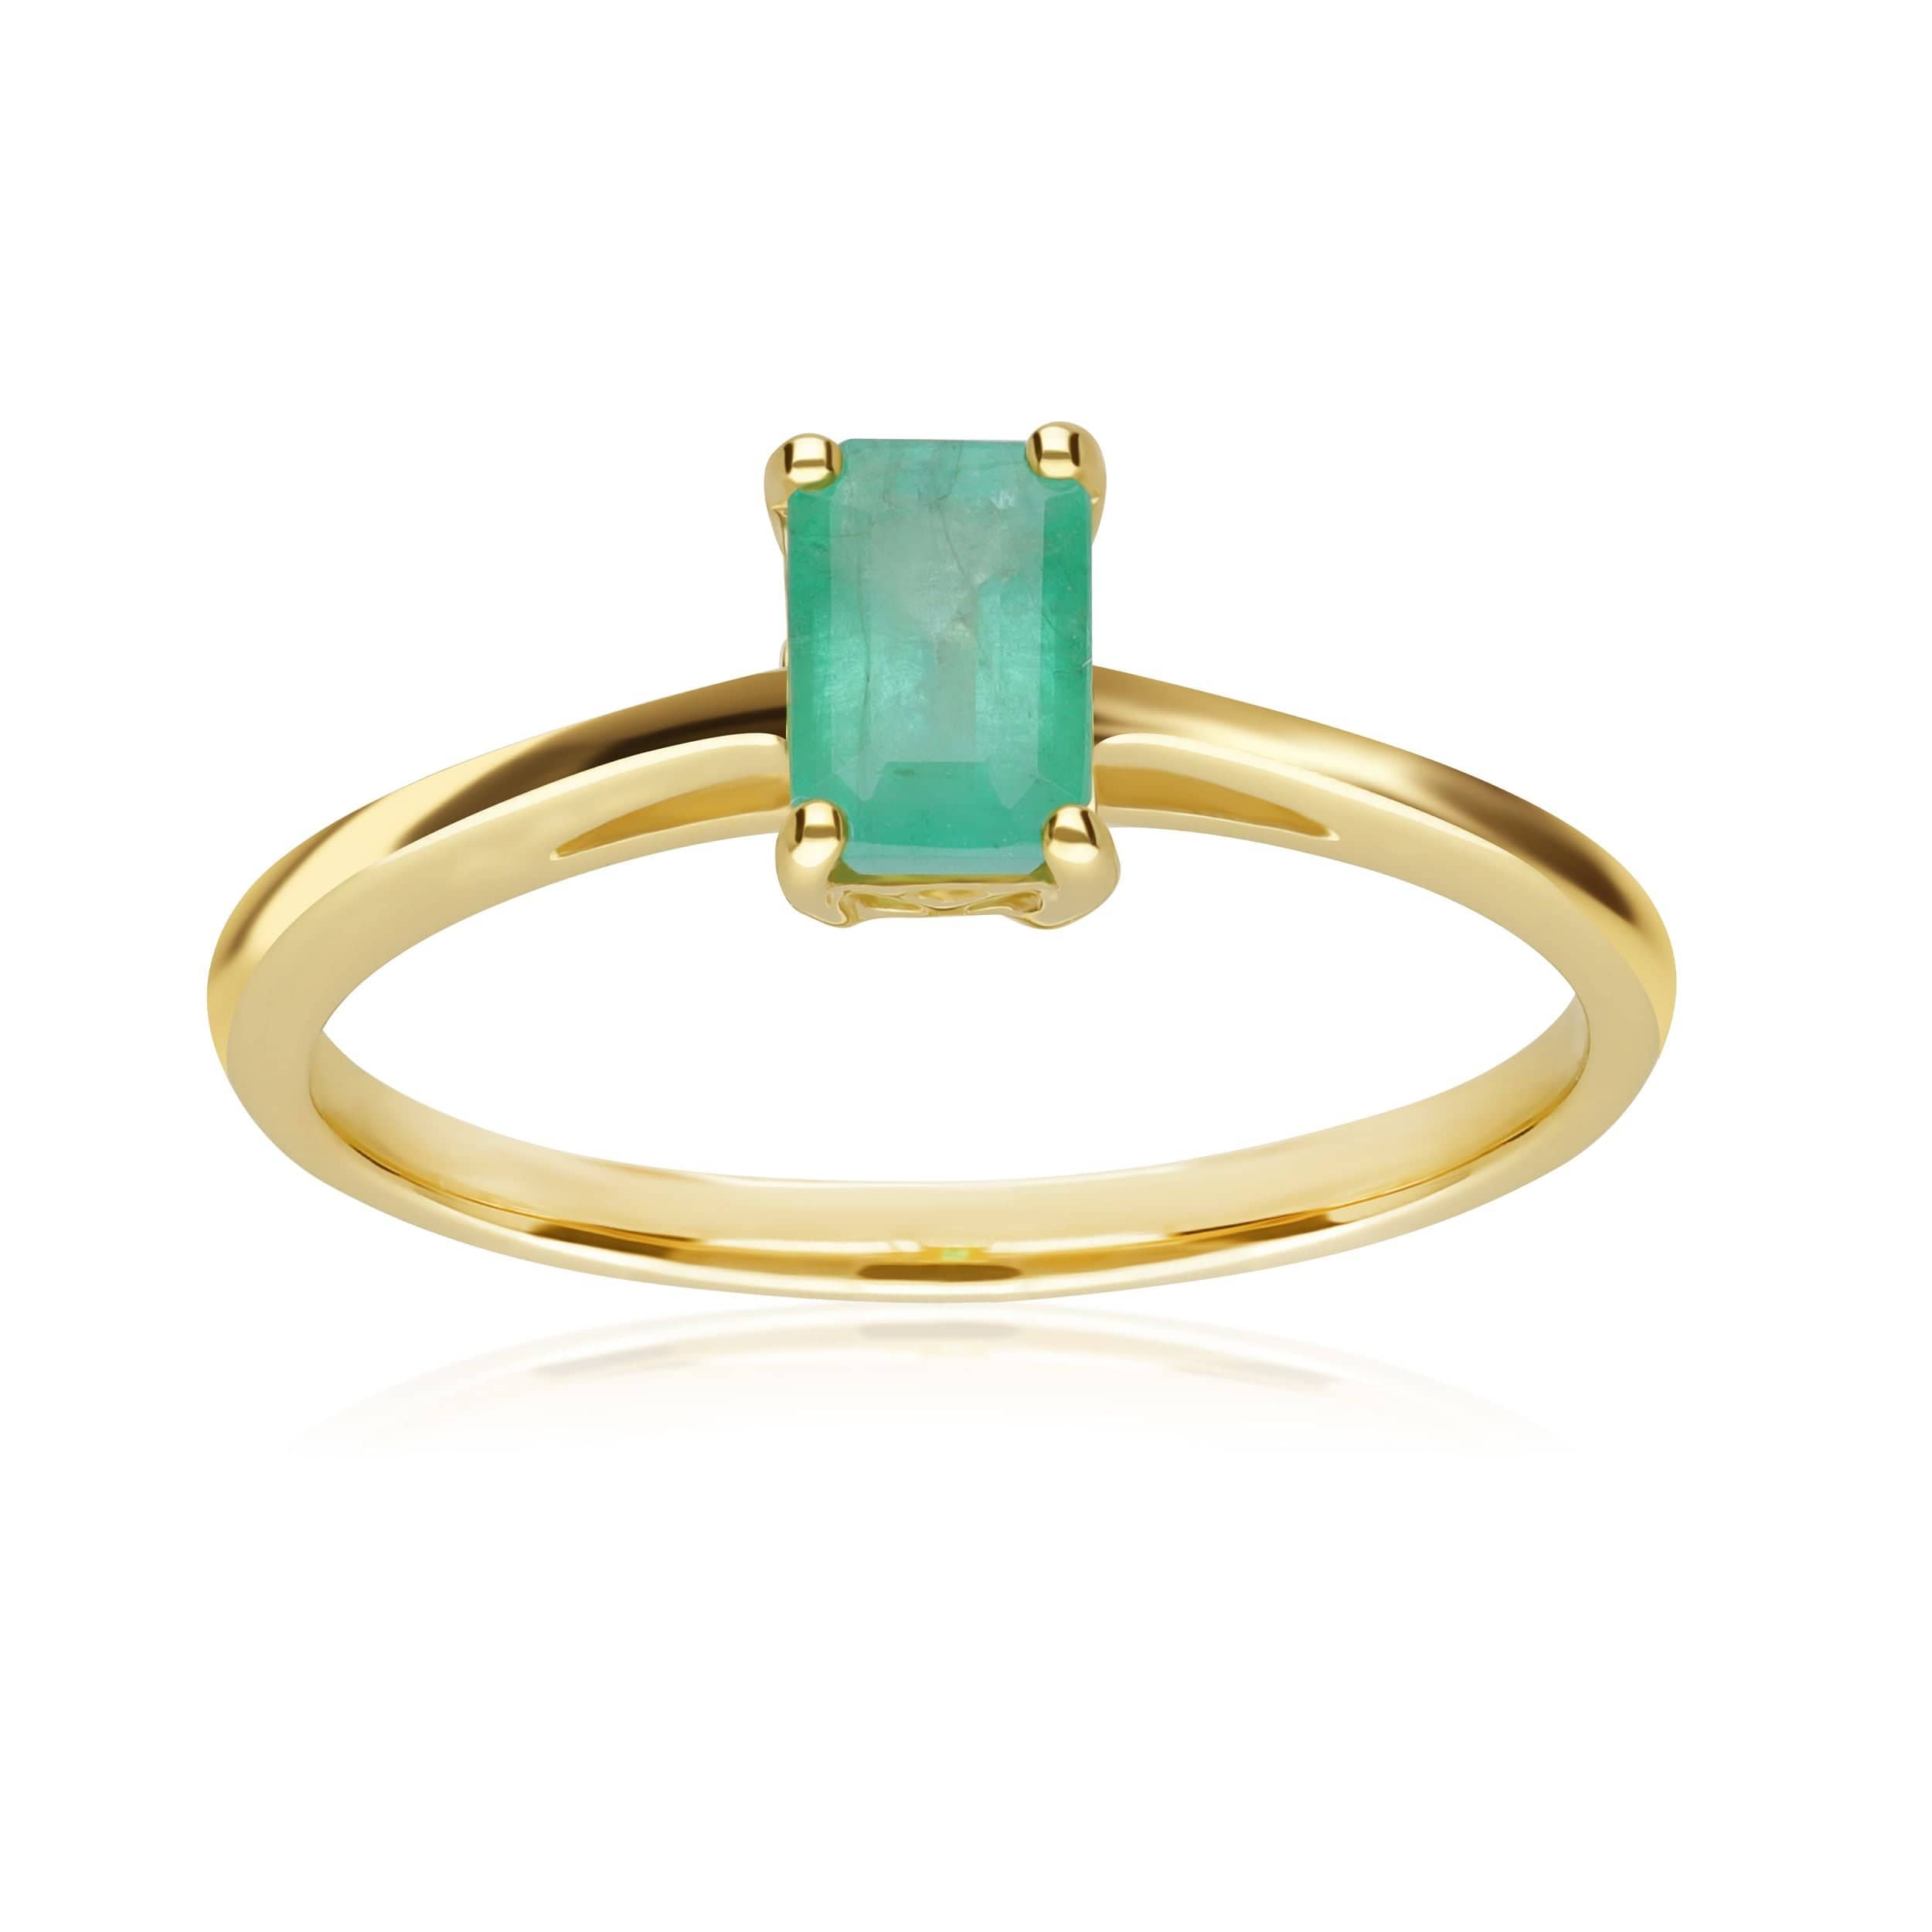 135R1312019 Classic Baguette Emerald Ring in 9ct Yellow Gold 1